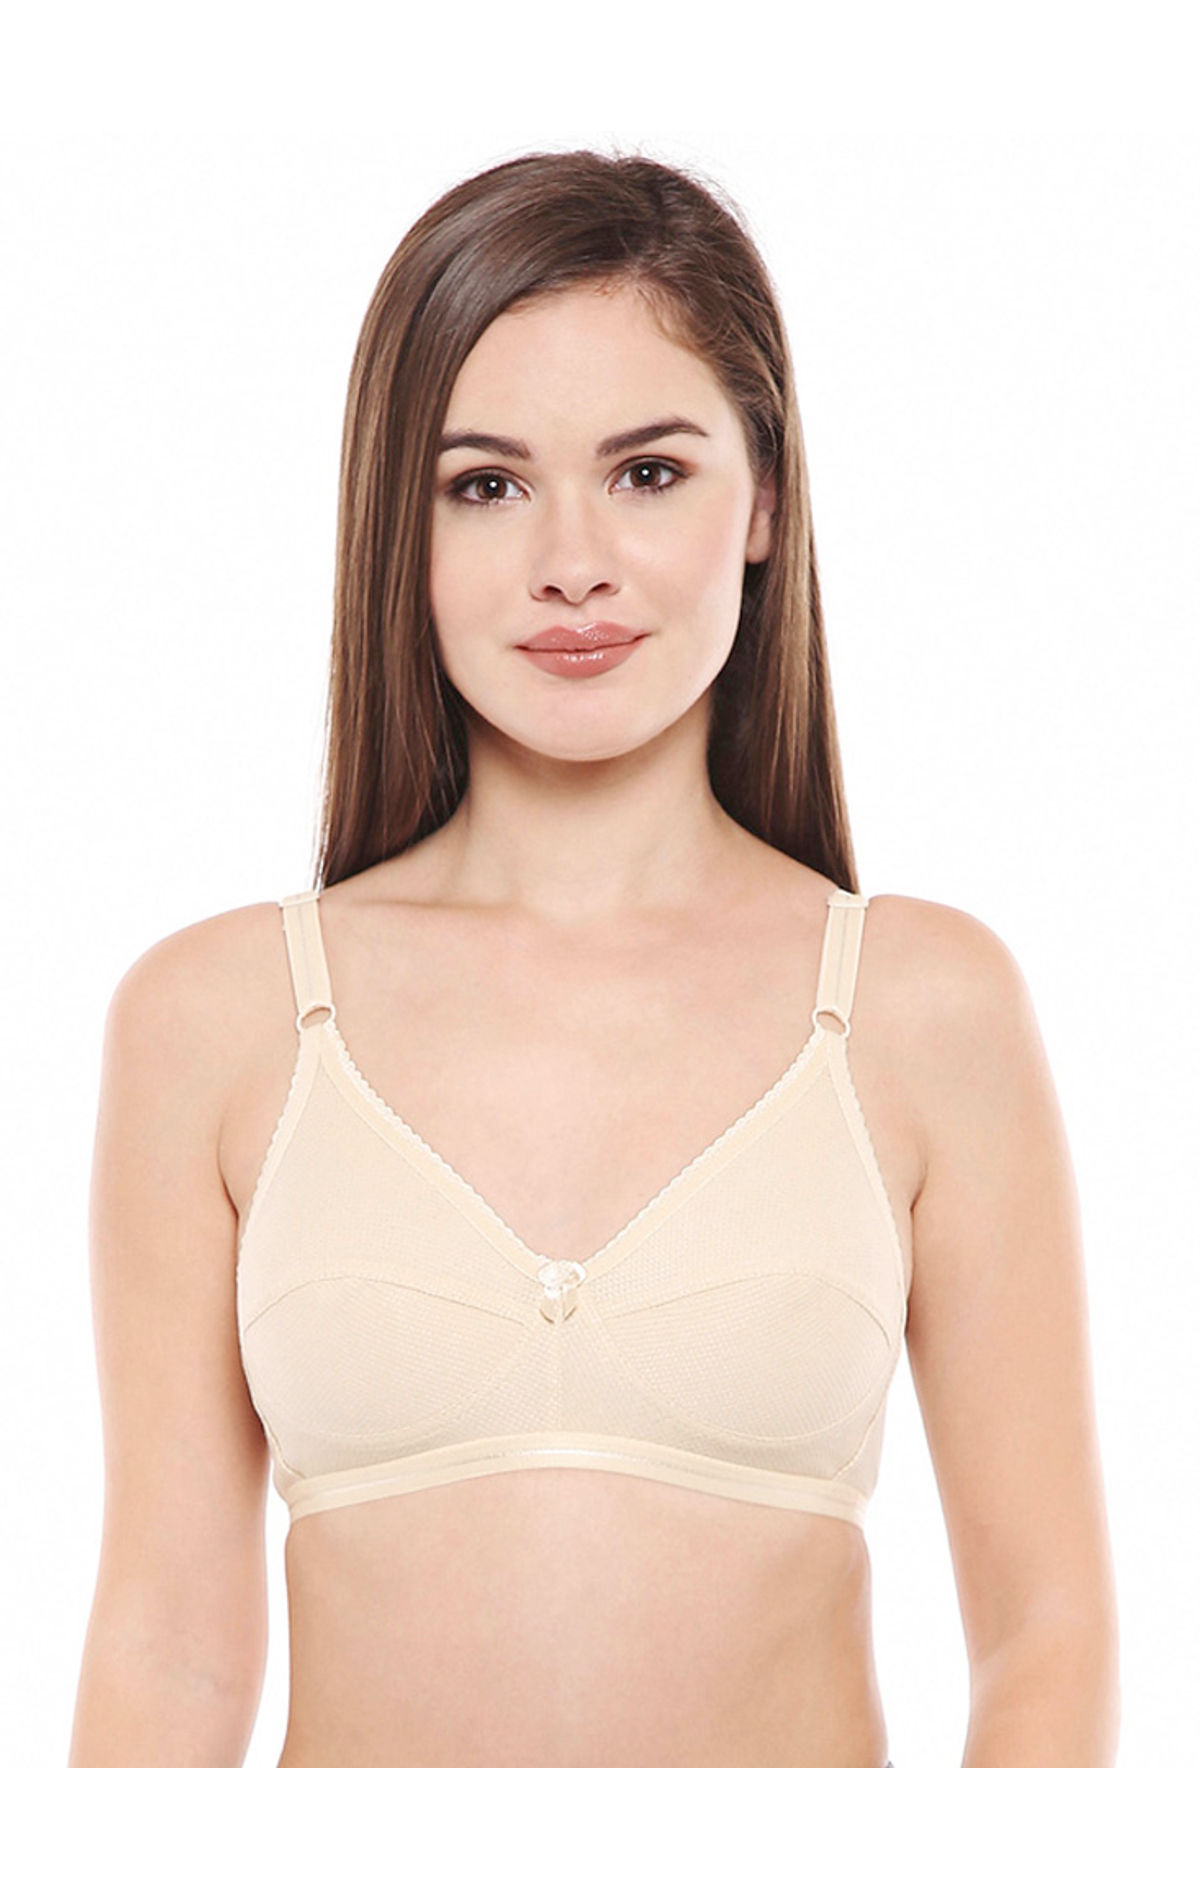 Bodycare 44C Size Bras Price Starting From Rs 219. Find Verified Sellers in  Ahmedabad - JdMart